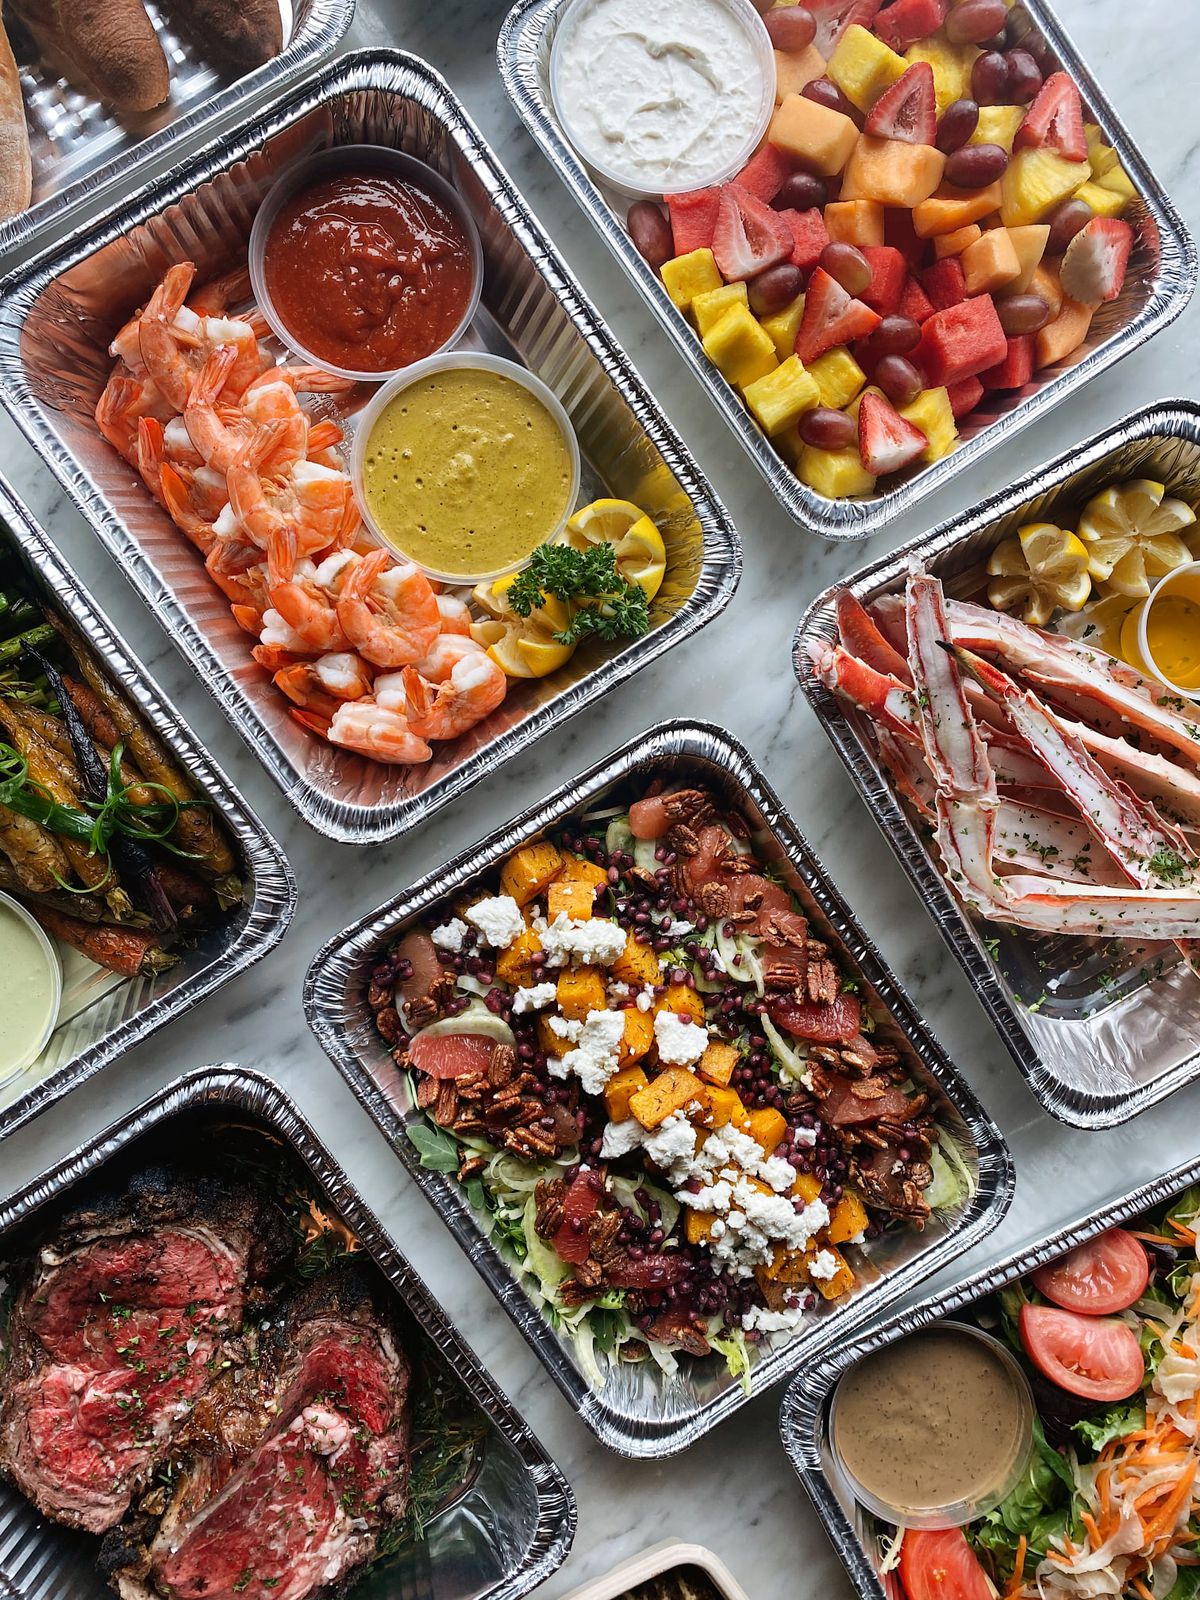 6Smith’s Easter take-and-make meals all portioned in aluminum takeout containers. Prime-rib, salad, shrimp cocktail, fruit salad, and crab legs are pictured.